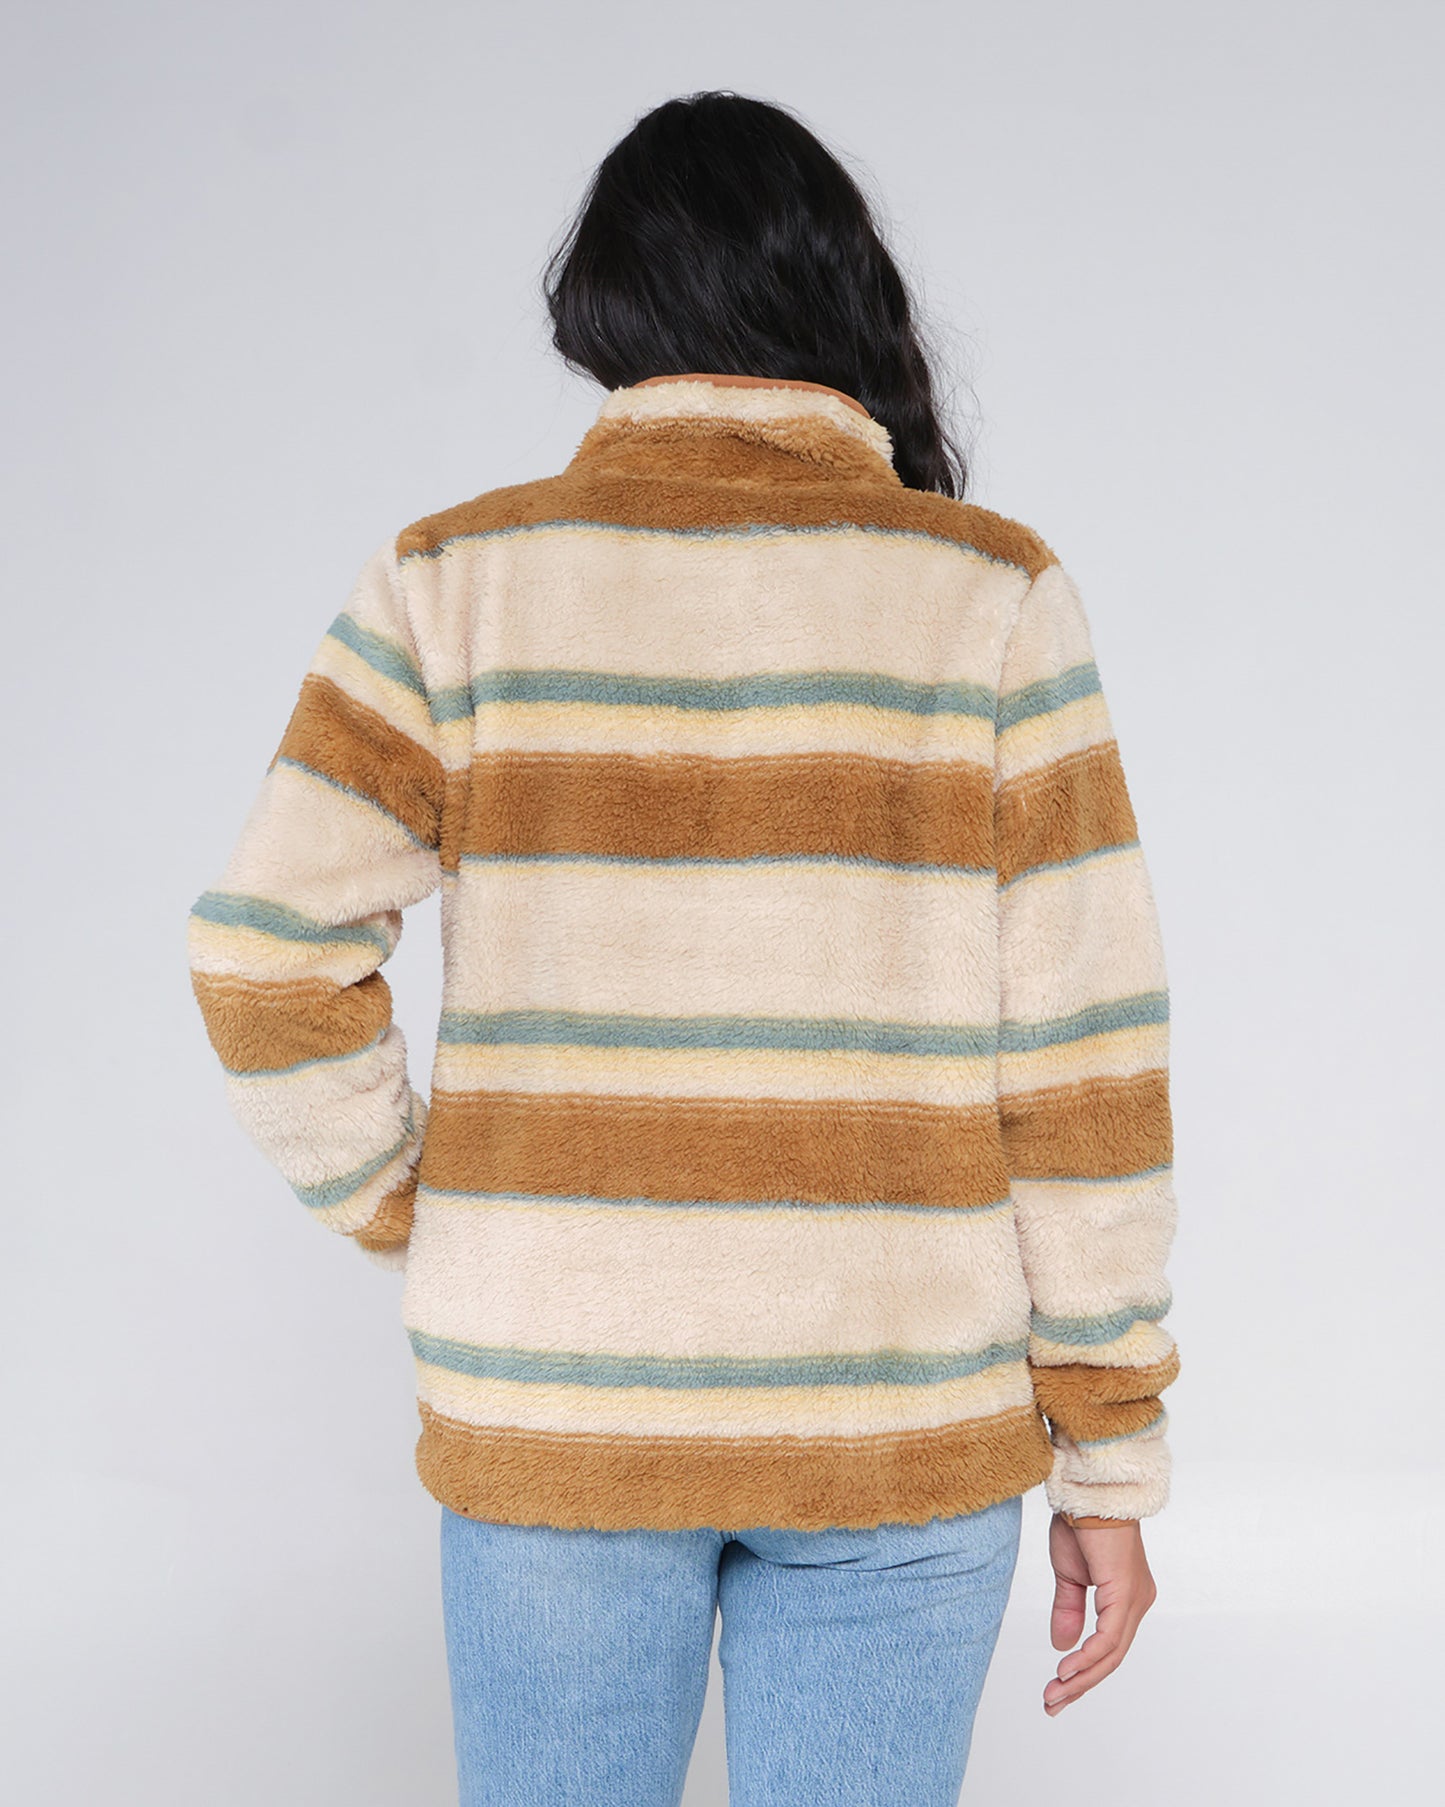 On body back of the Calm Seas Natural Pullover